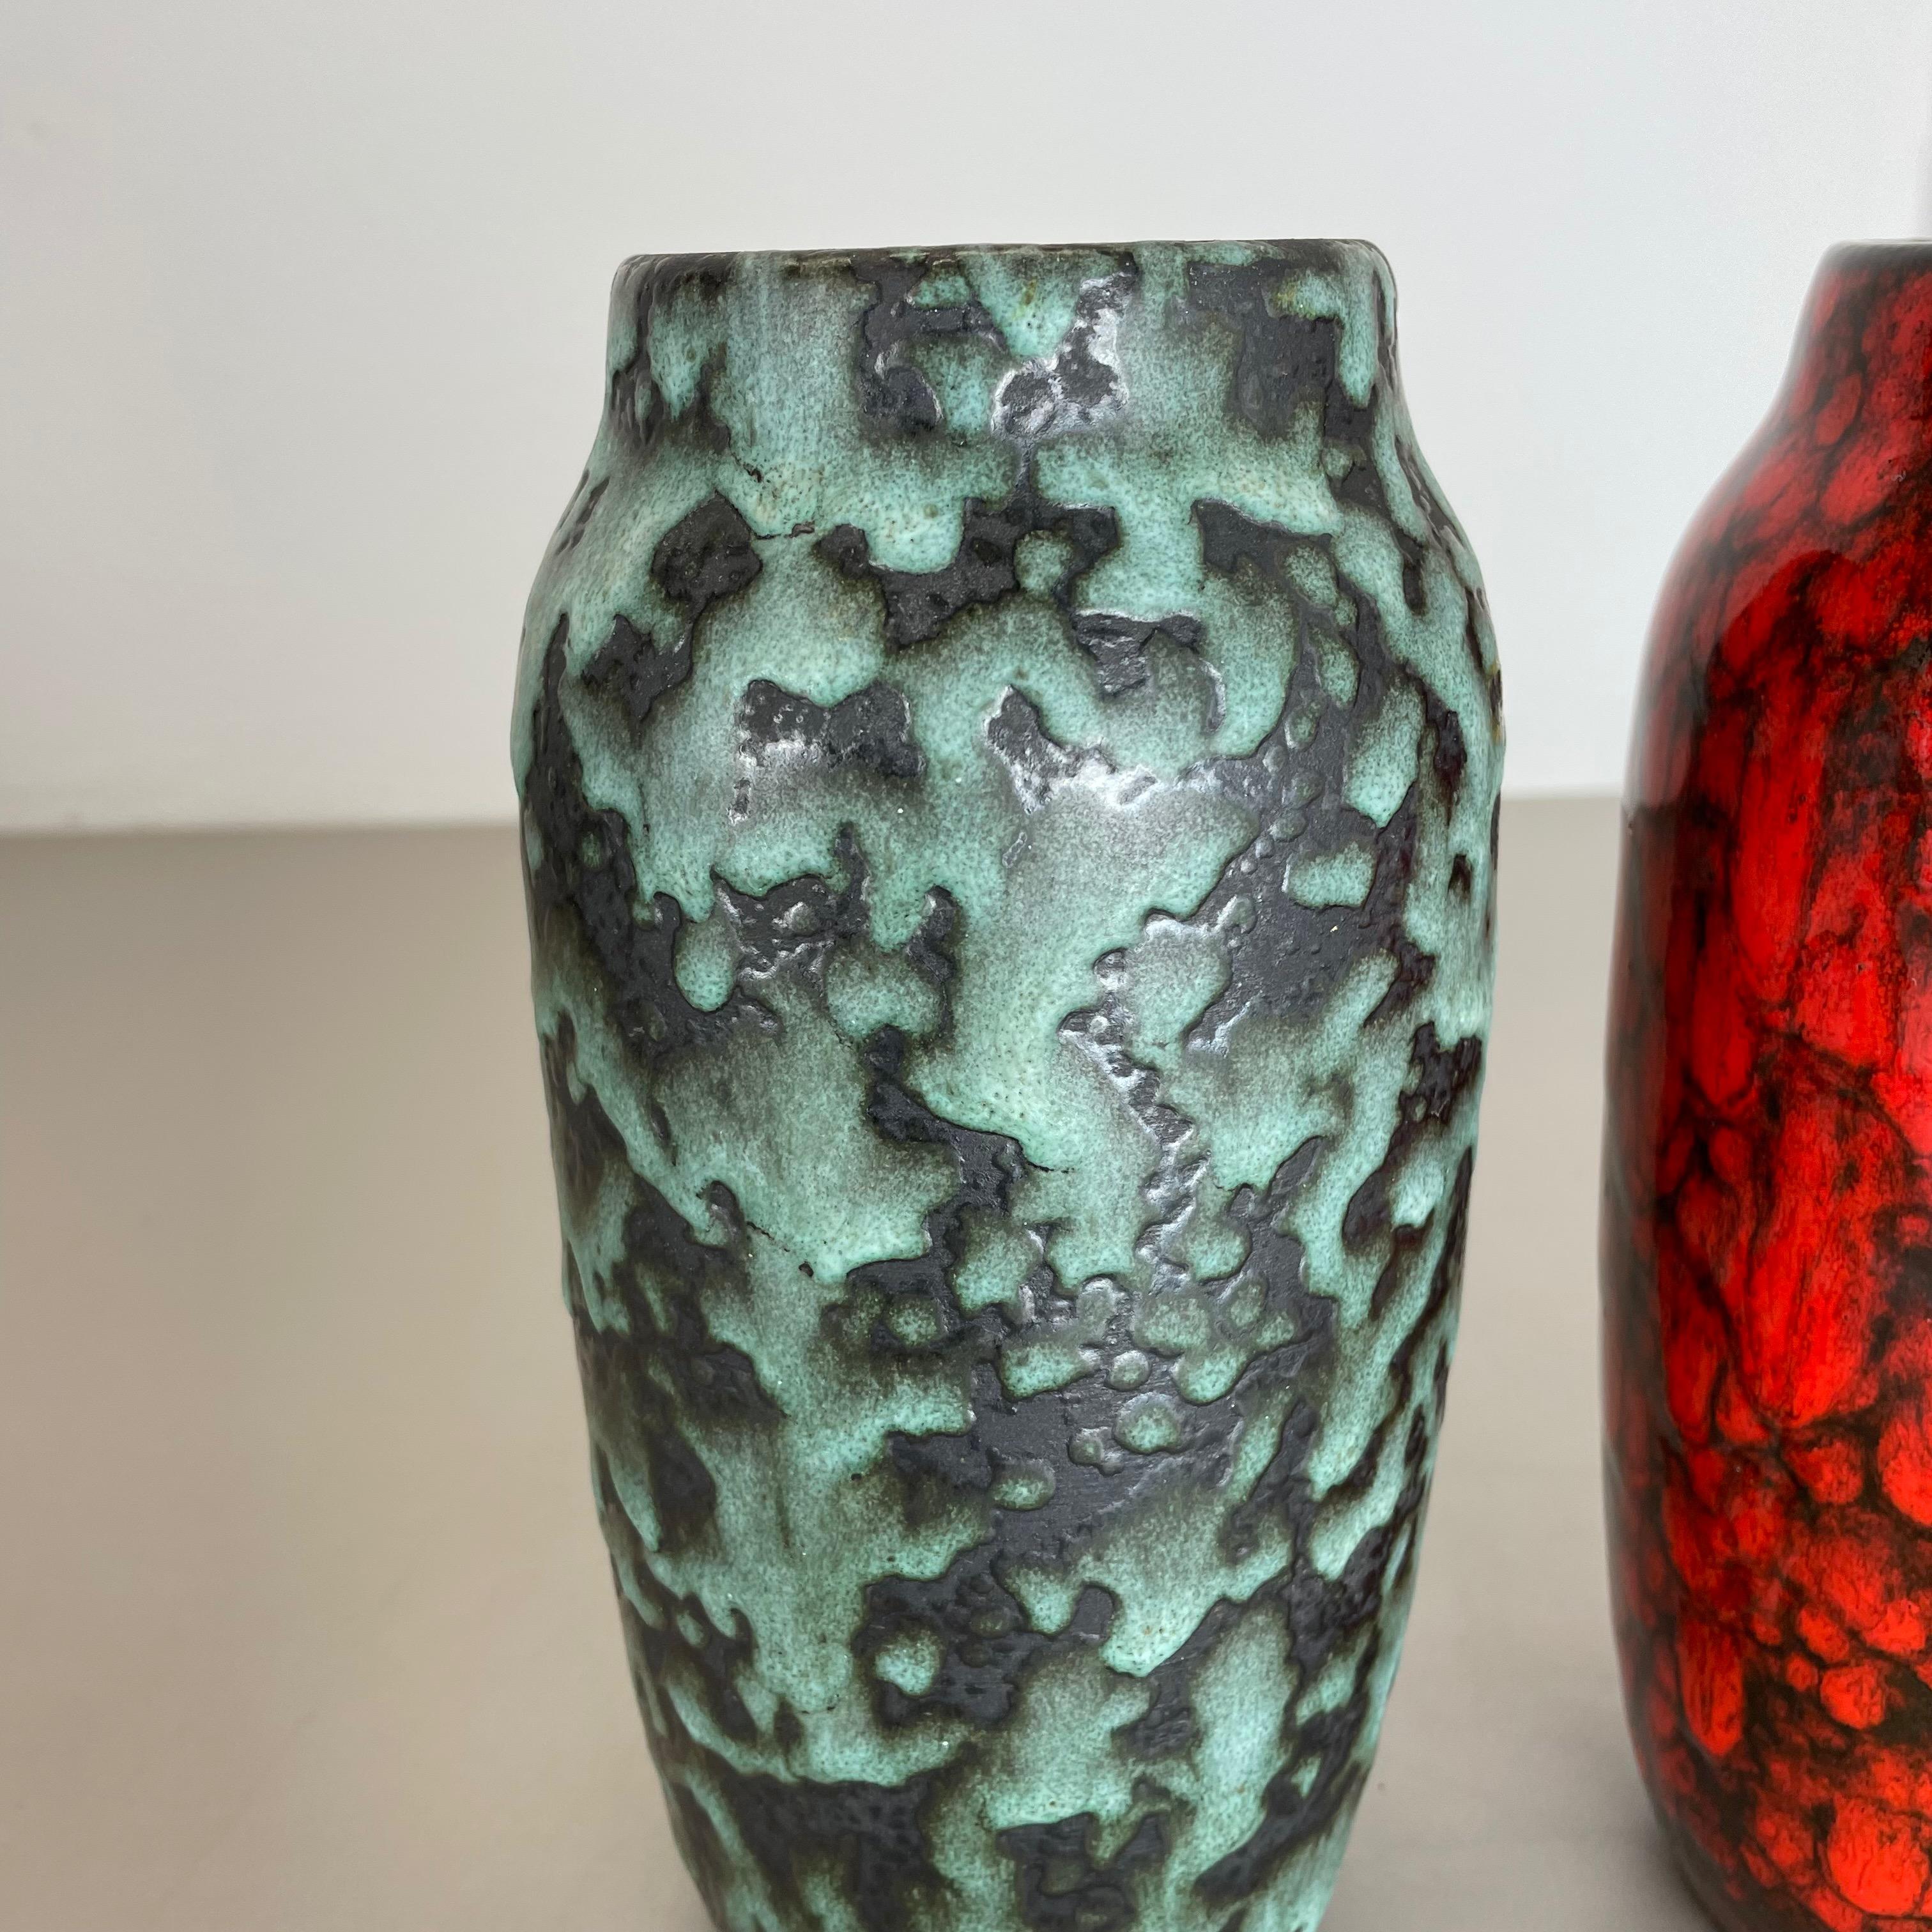 Set of 2 Rare Super Color Crusty Fat Lava Vases by Scheurich, Germany WGP, 1970s For Sale 3